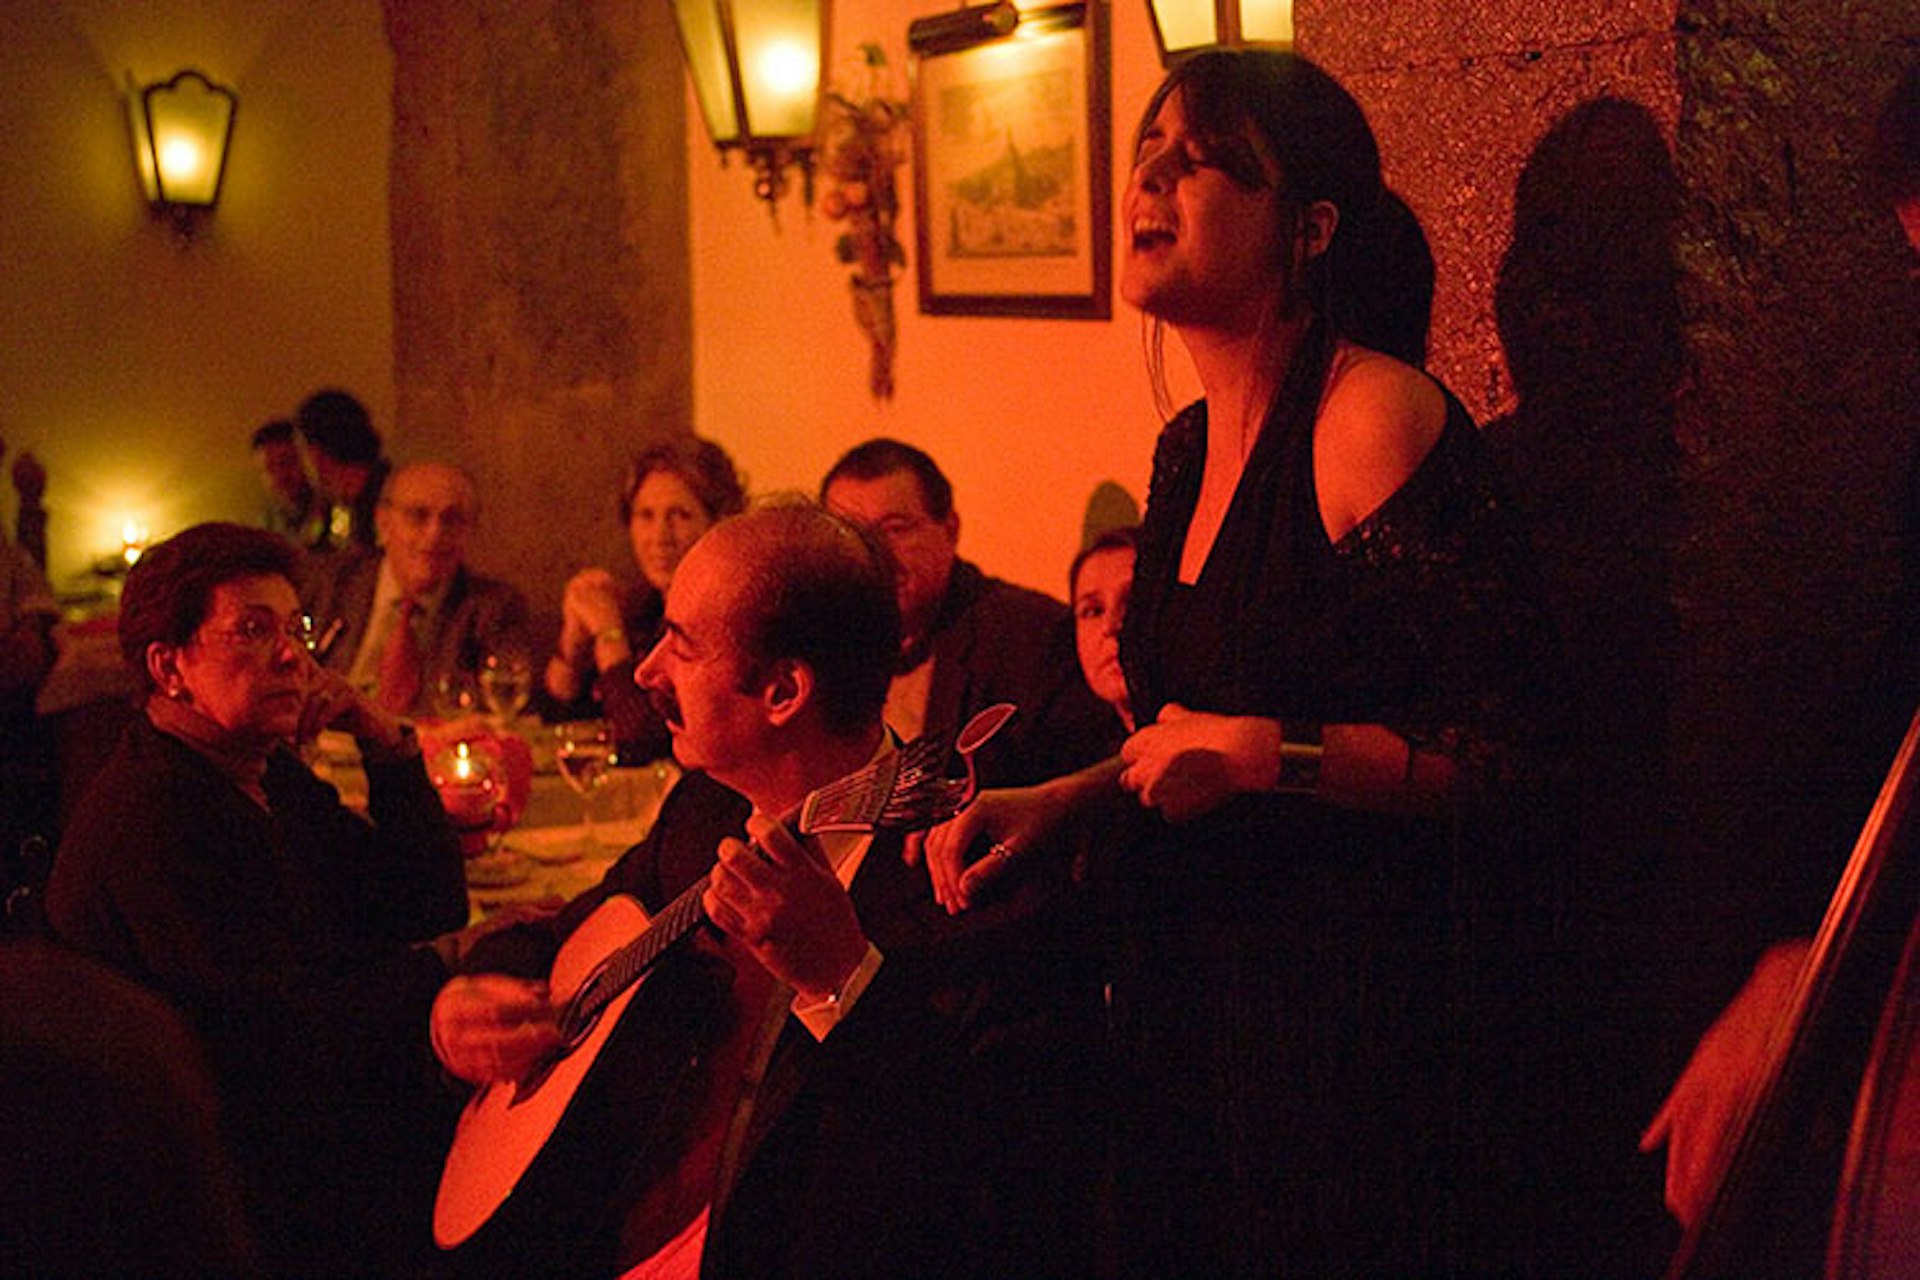 Nothing can express your emotional anguish better than a bit of Portuguese fado. Image by Greg Elms / Lonely Planet Images / Getty Images.